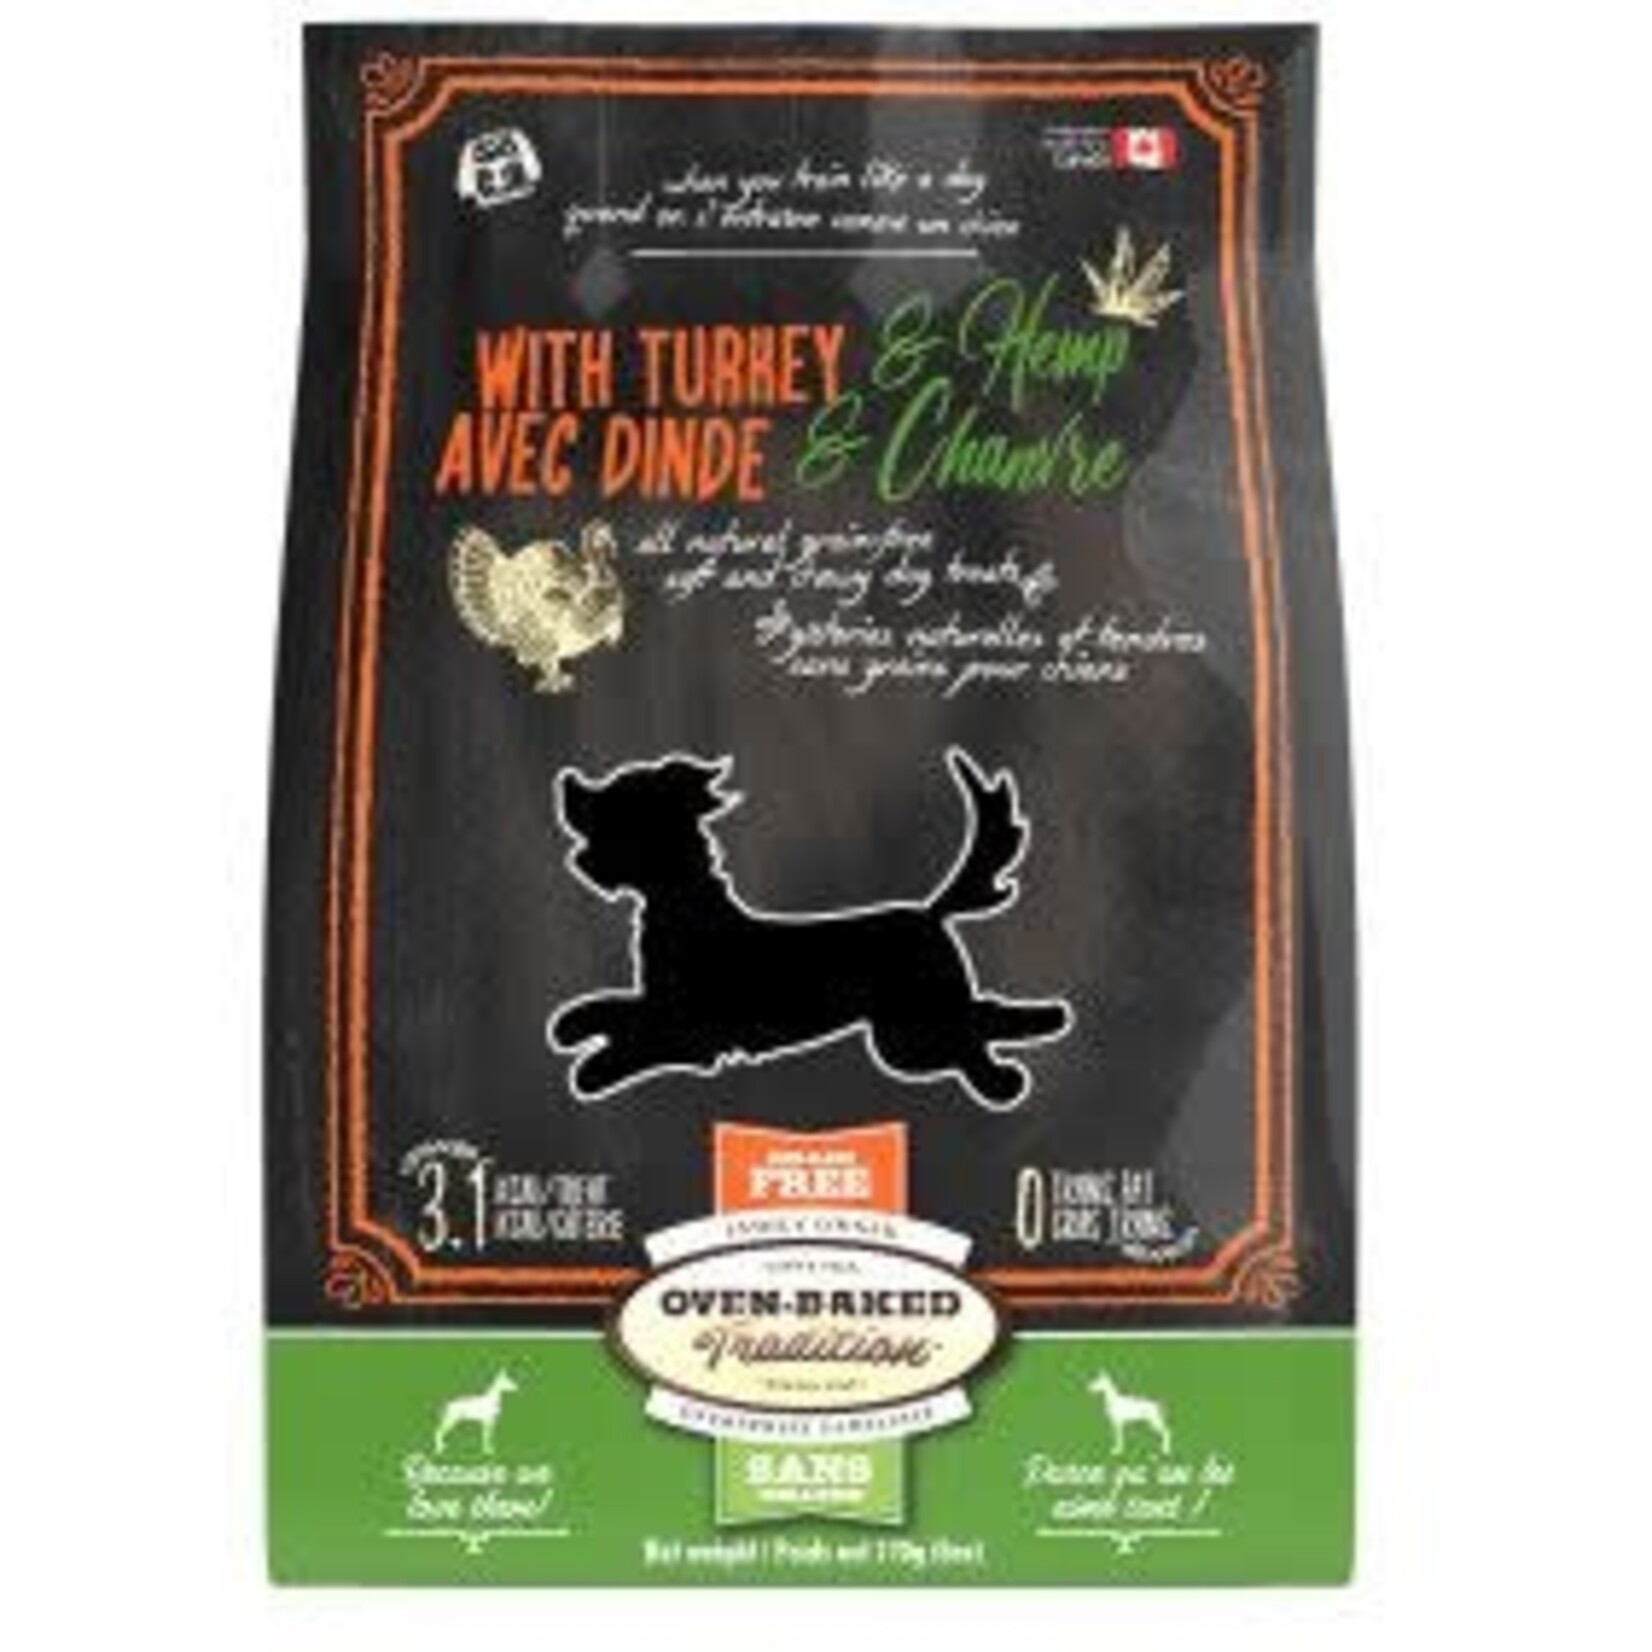 Oven-Baked Tradition Grain Free Soft & Chewy Dog Treat